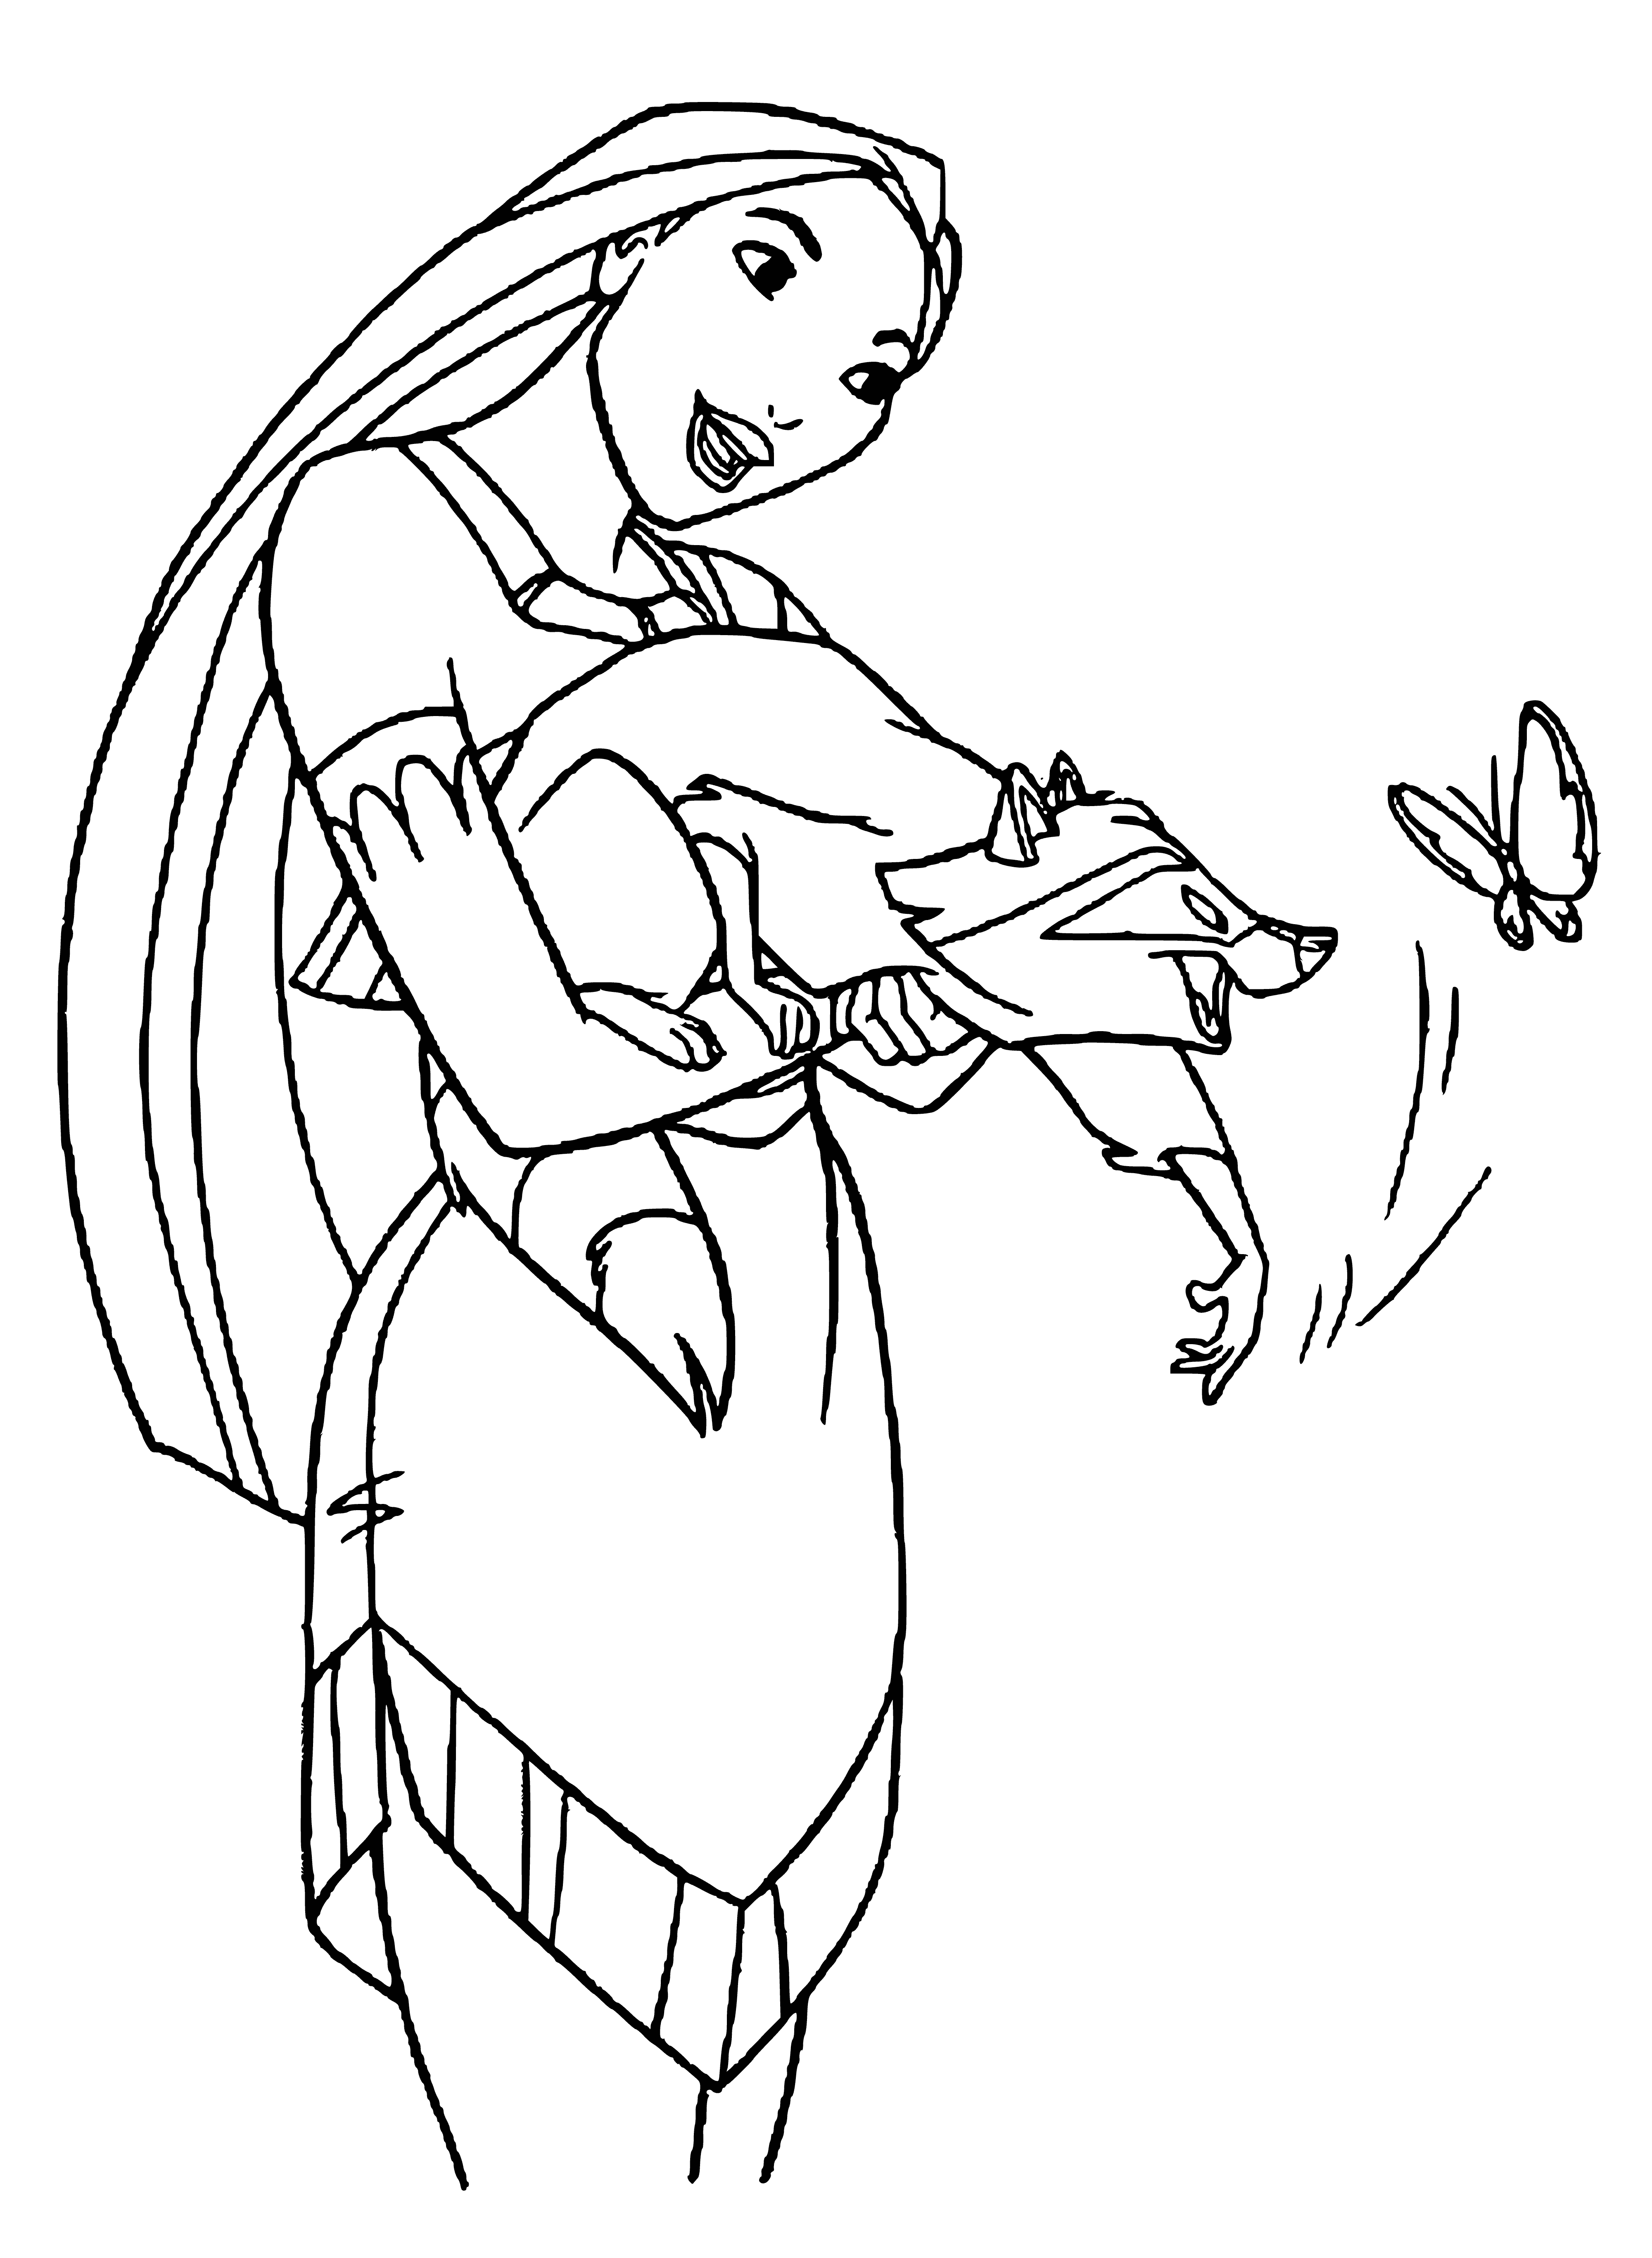 coloring page: Pocahontas & her pet stand in a colourful forest; she wears a brown dress with a yellow belt & a feather in her black hair. Miko is a white&brown rabbit. #animals #nature